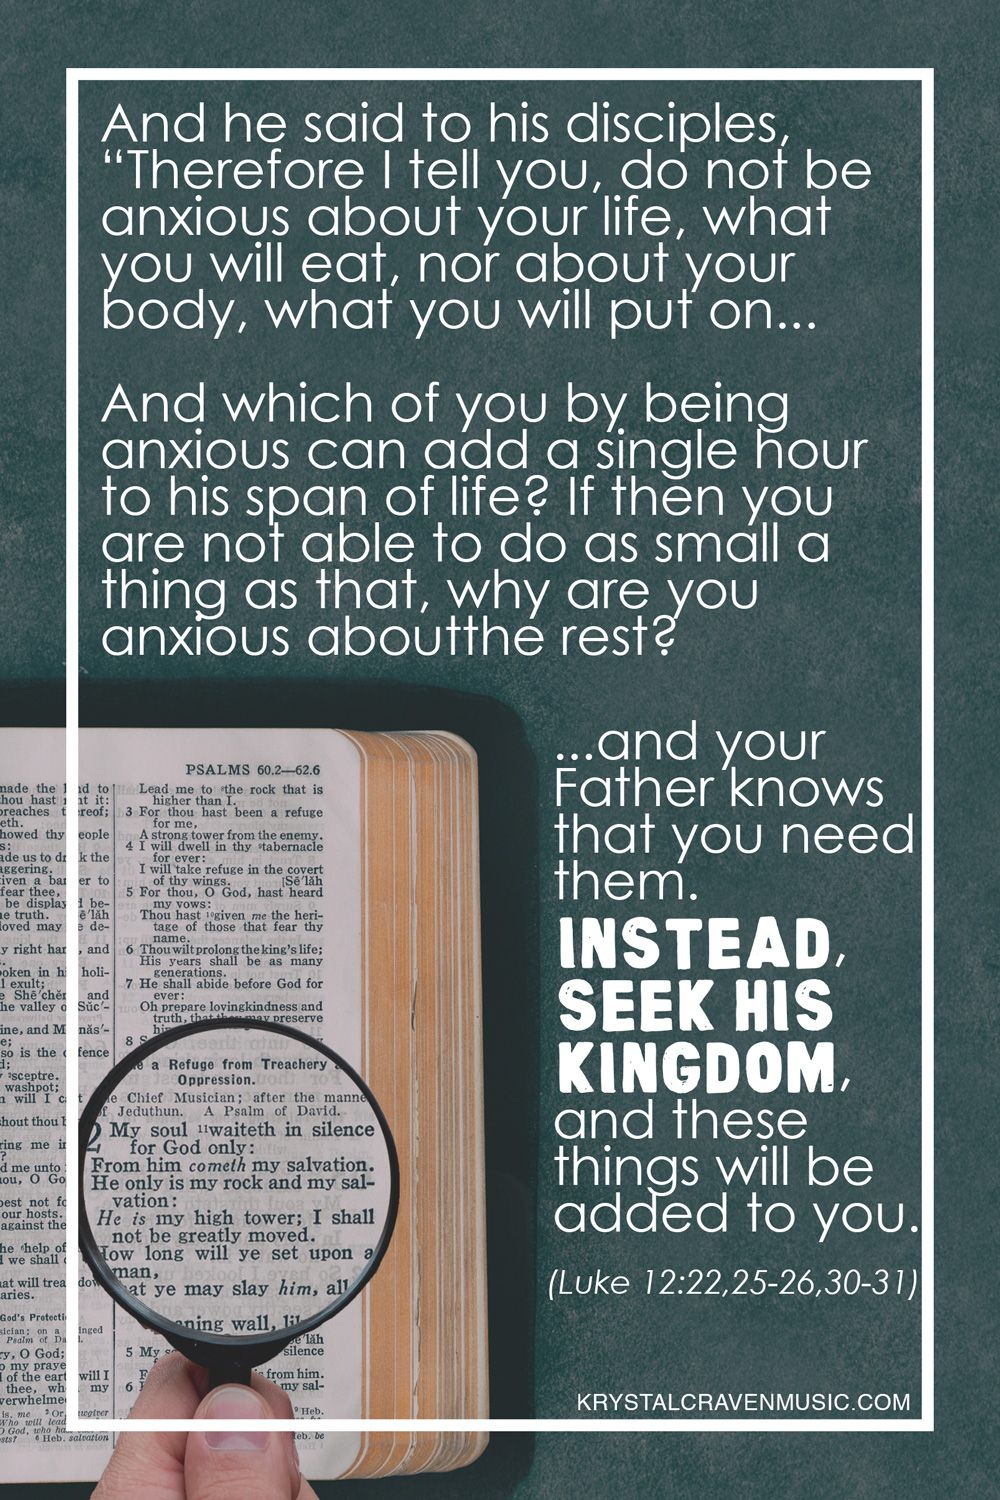 The text from Luke 12:22,25-26,30-31 "And he said to his disciples, “Therefore I tell you, do not be anxious about your life, what you will eat, nor about your body, what you will put on... And which of you by being anxious can add a single hour to his span of life? If then you are not able to do as small a thing as that, why are you anxious about the rest? ...and your Father knows that you need them. Instead, seek his kingdom, and these things will be added to you." over a hand holding a magnifying glass over a Bible.